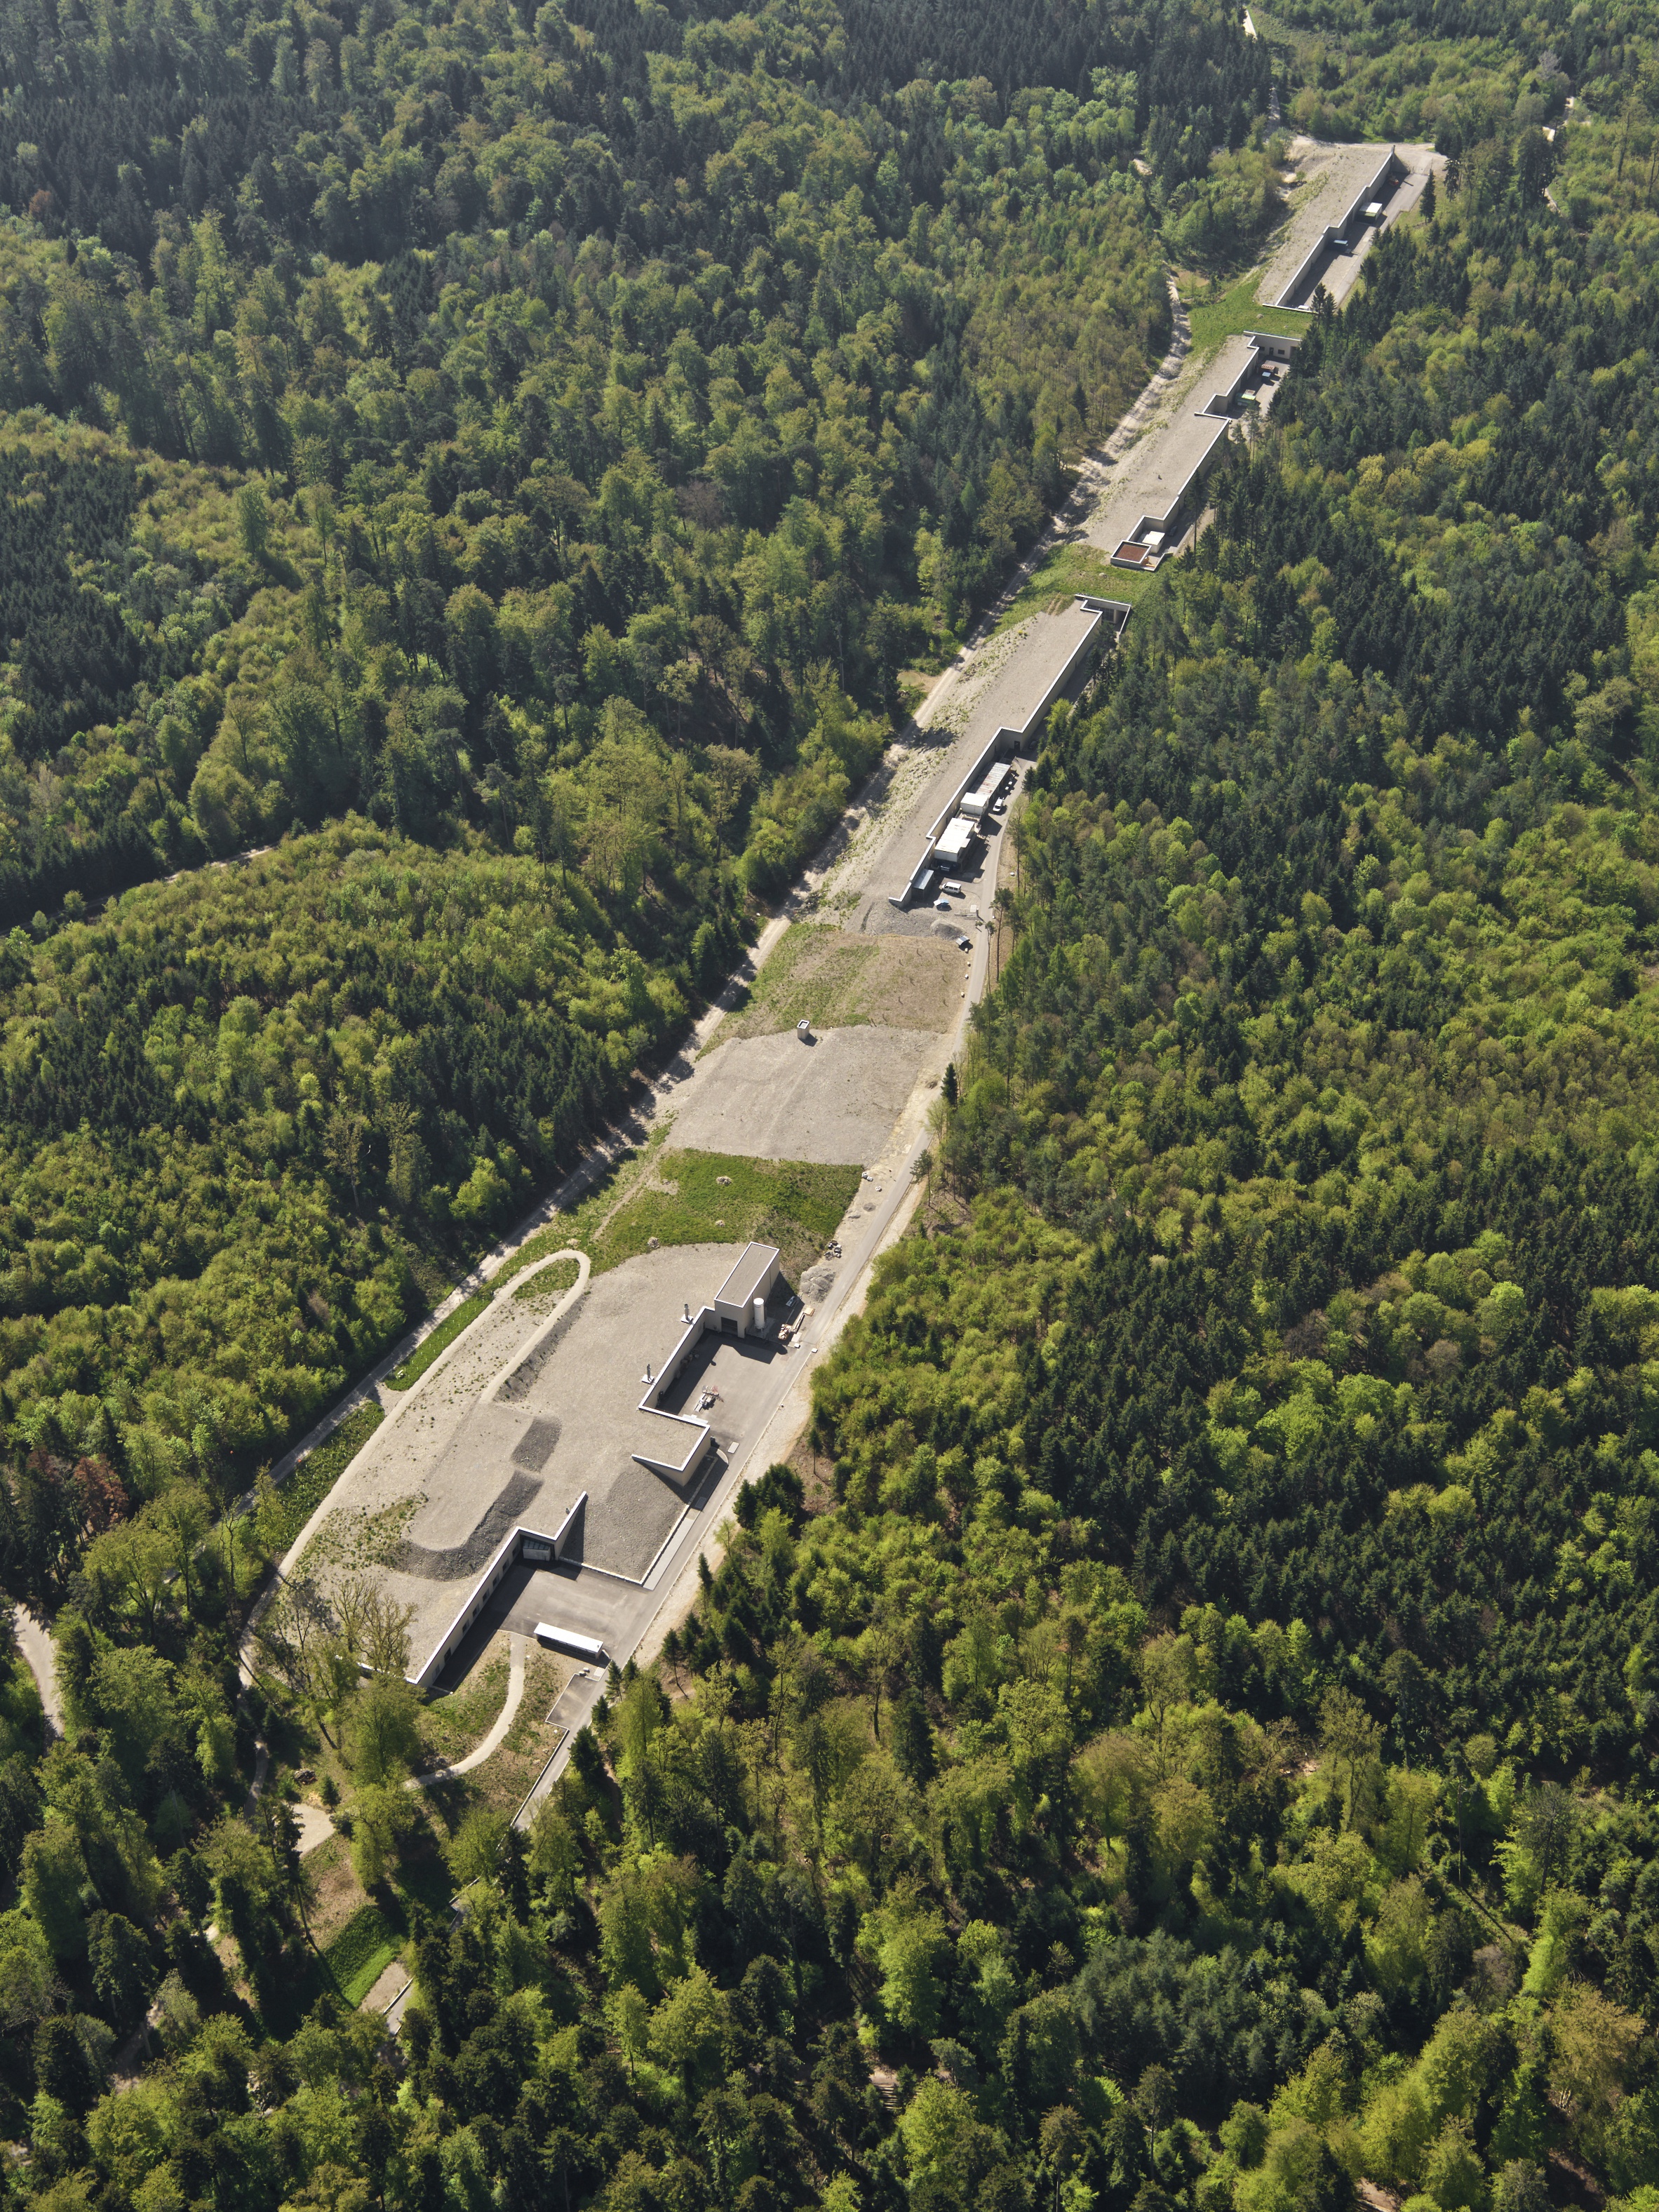 Aerial view of the facility